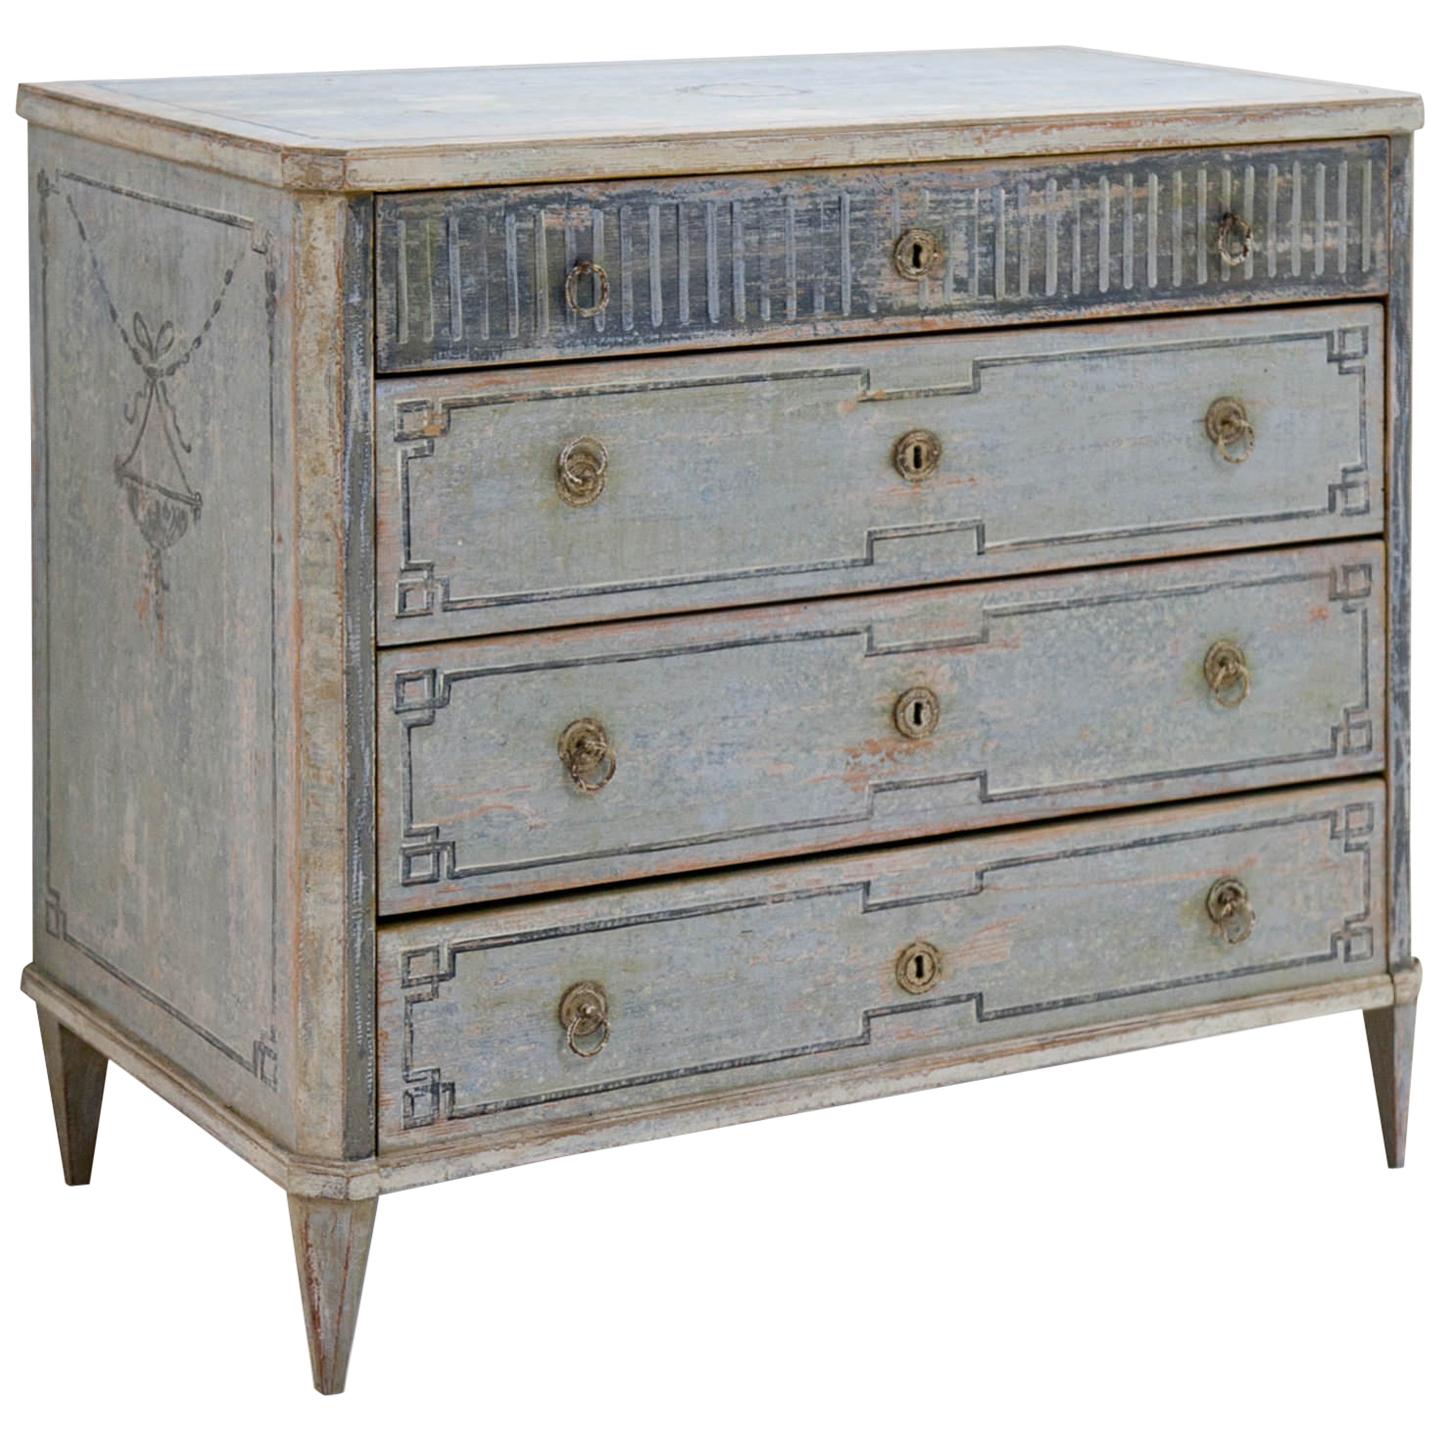 Gustavian-Style Painted Chest of Drawers, 19th Century